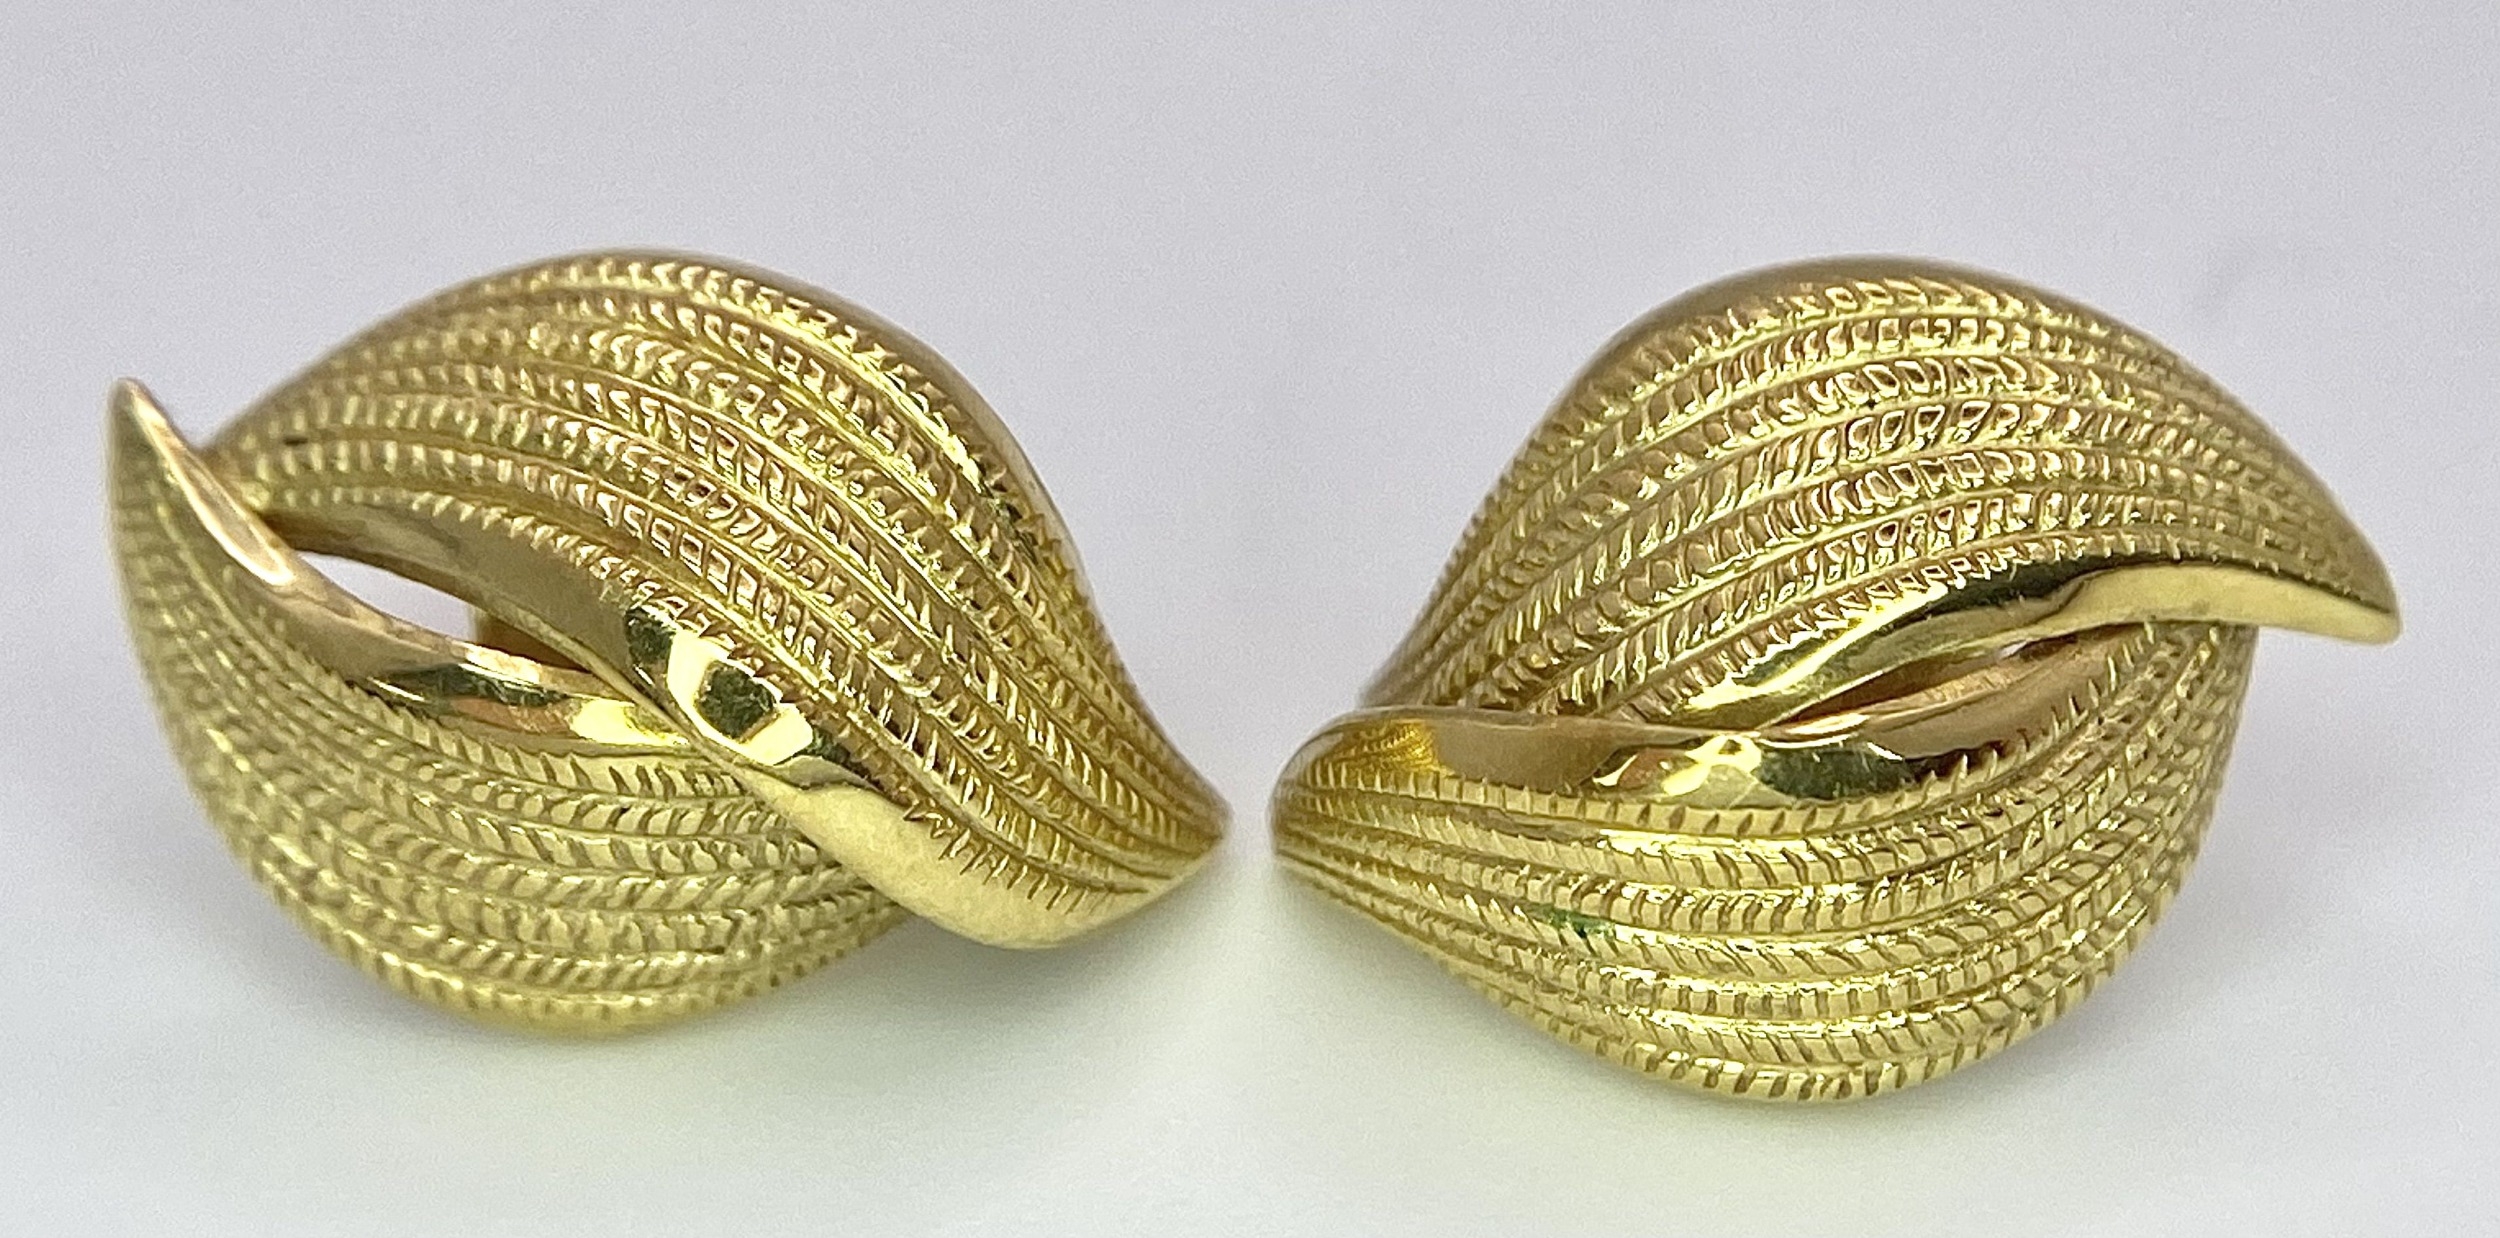 A Pair of 18K Yellow Gold Decorative Leaf Earrings. 3.2g